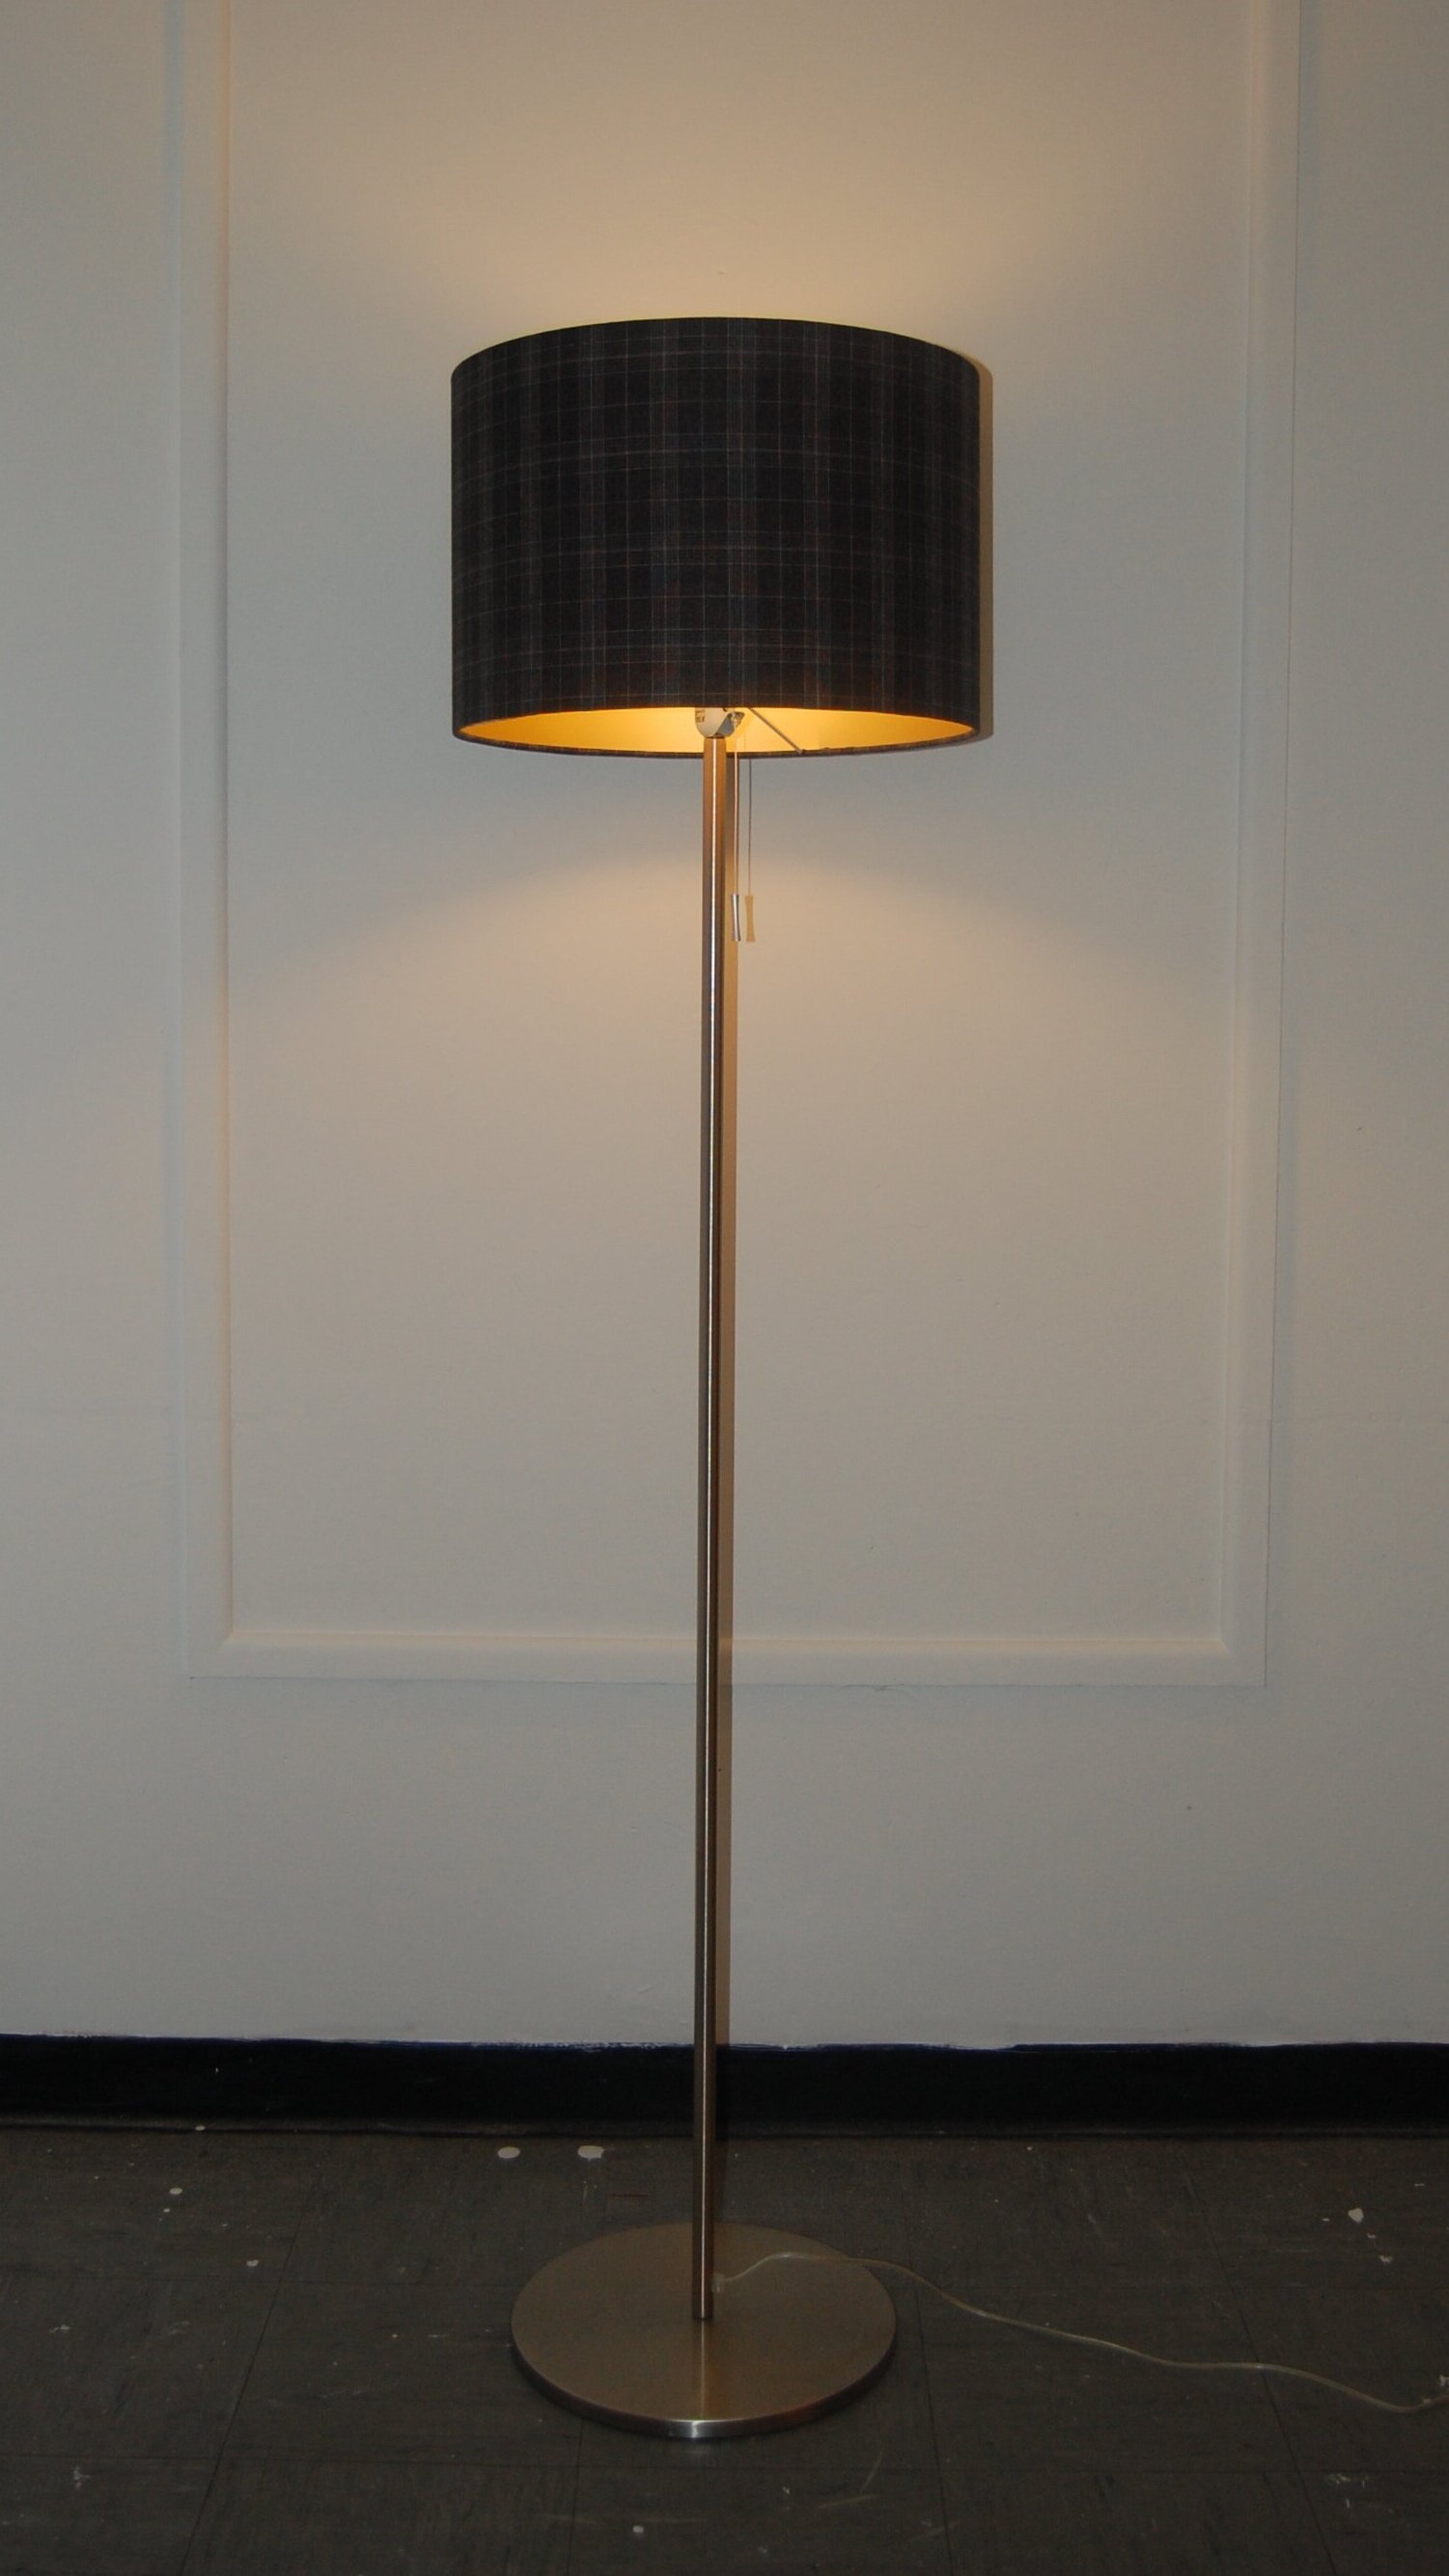 Bespoke Floor Lamp Shades And Standard, Extra Large Lamp Shades For Floor Lamps Uk